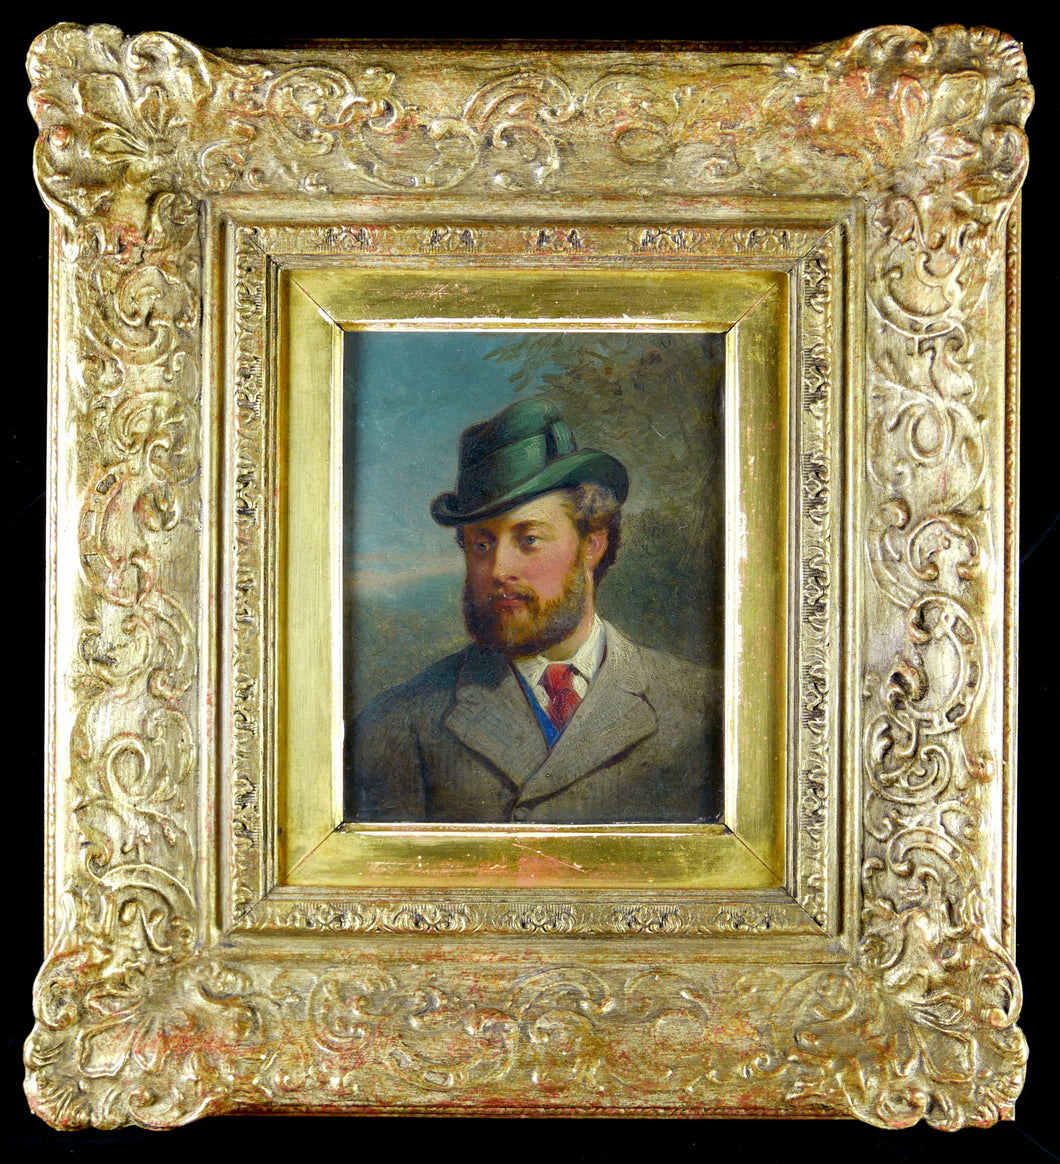 Portrait of The Prince of Wales, 1871